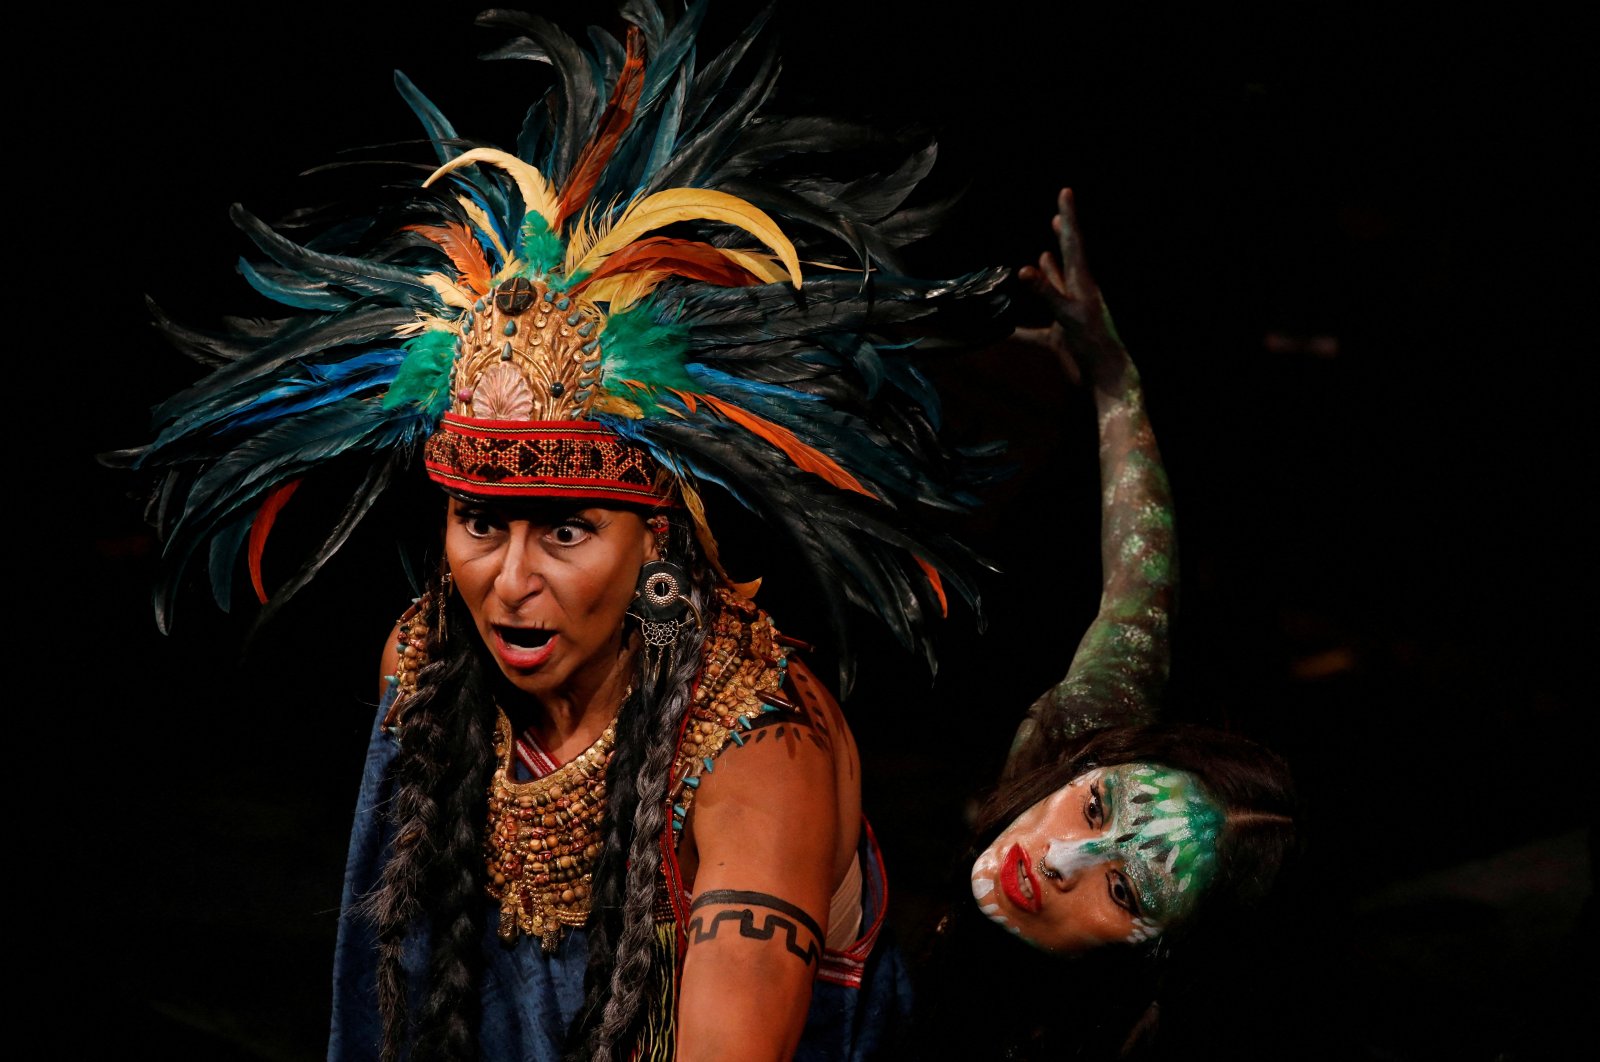 Cast members perform during the Epic Cantata Cuitlahuatzin, a multidisciplinary show in Nahuatl about the life of the Tlahtoani, who commanded the only battle in which the Mexicans defeated the Spanish, in the main hall of the Palace of Bellas Artes, Mexico City, Mexico, July 17, 2023. (Reuters Photo/File)